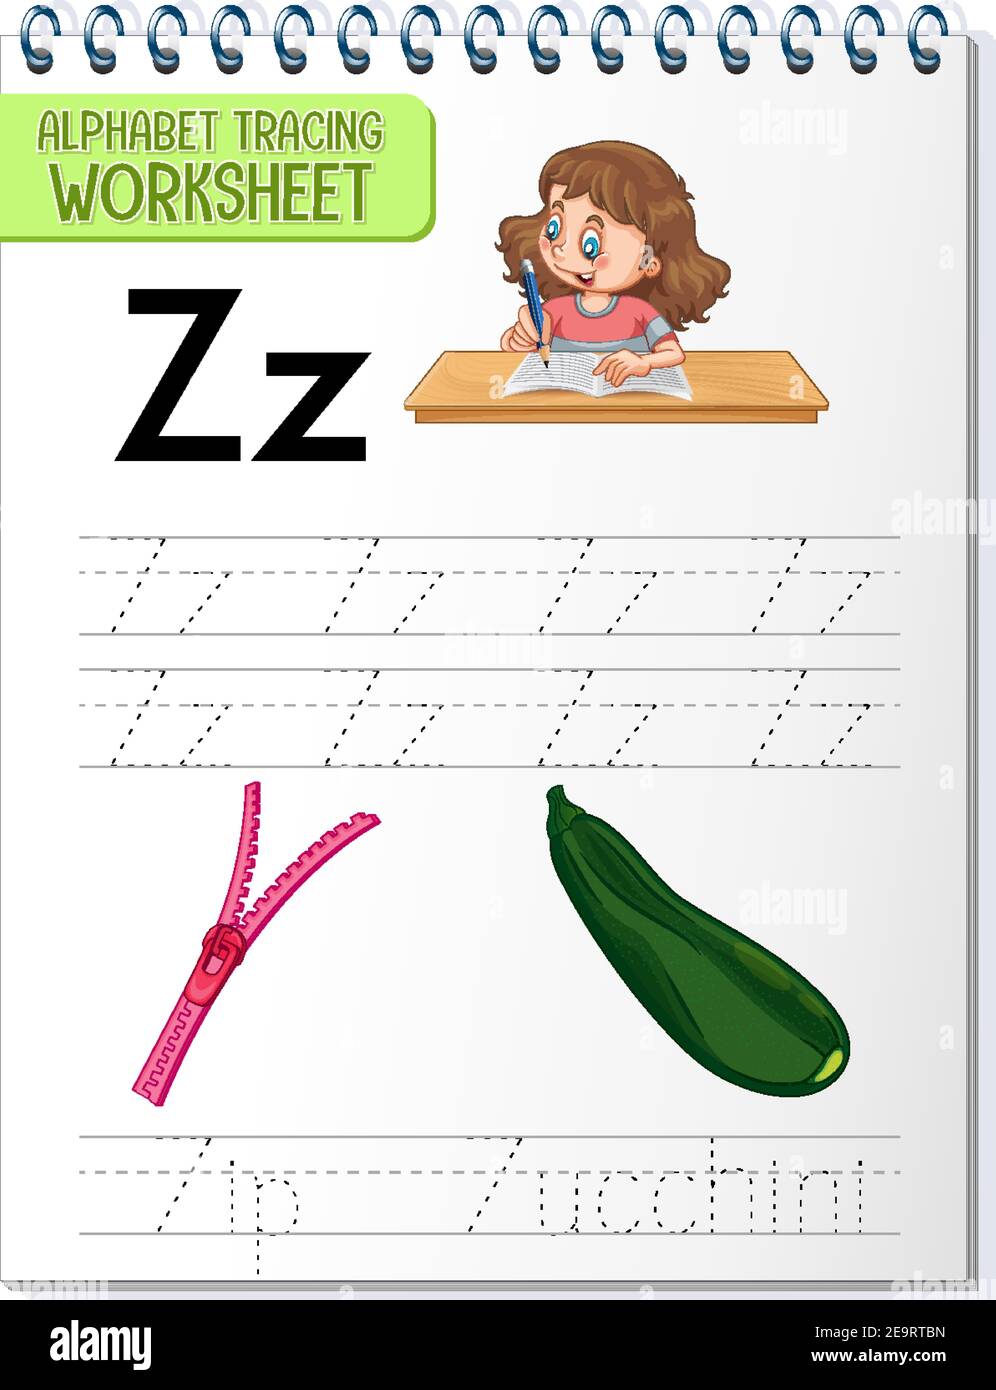 Alphabet tracing worksheet with letter Z and z illustration Stock Vector